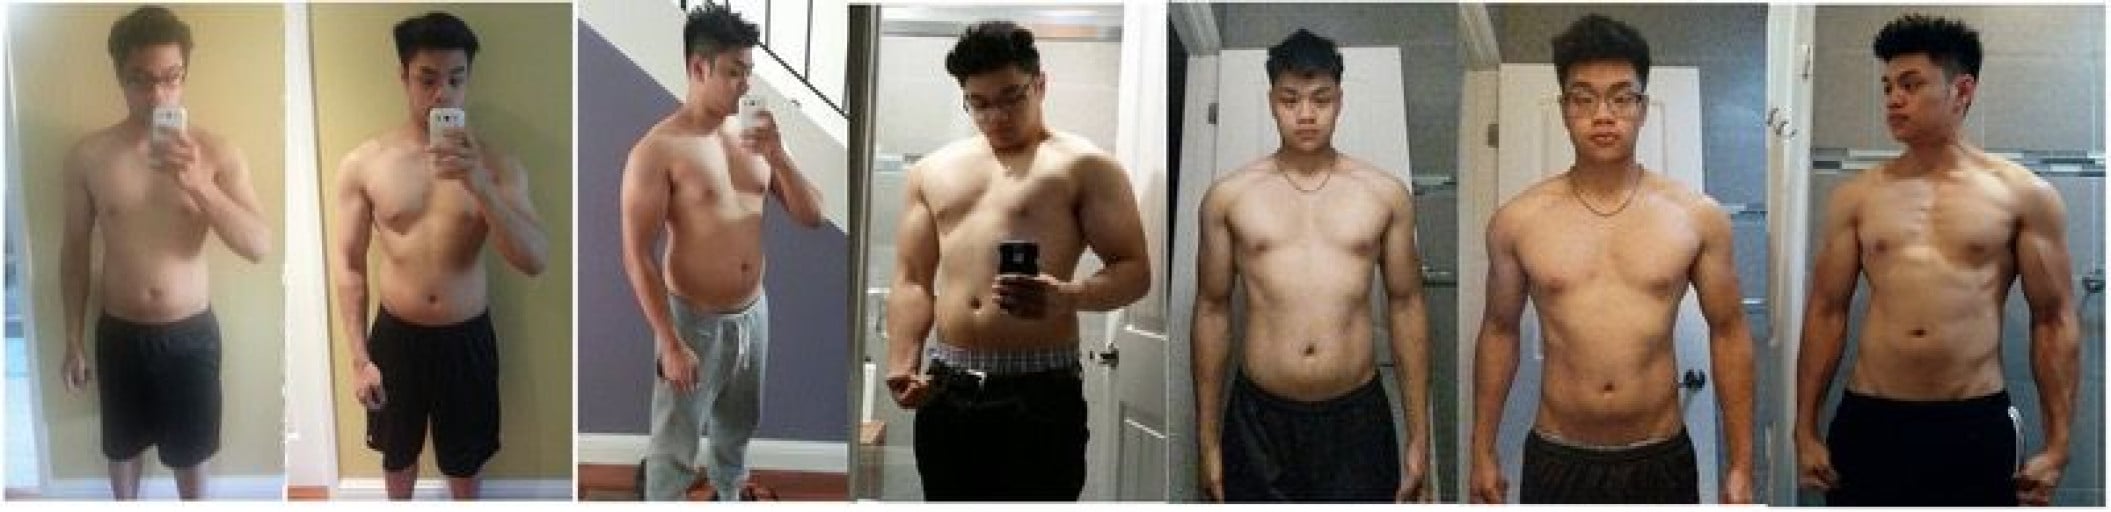 5 feet 8 Male Before and After 25 lbs Weight Gain 165 lbs to 190 lbs